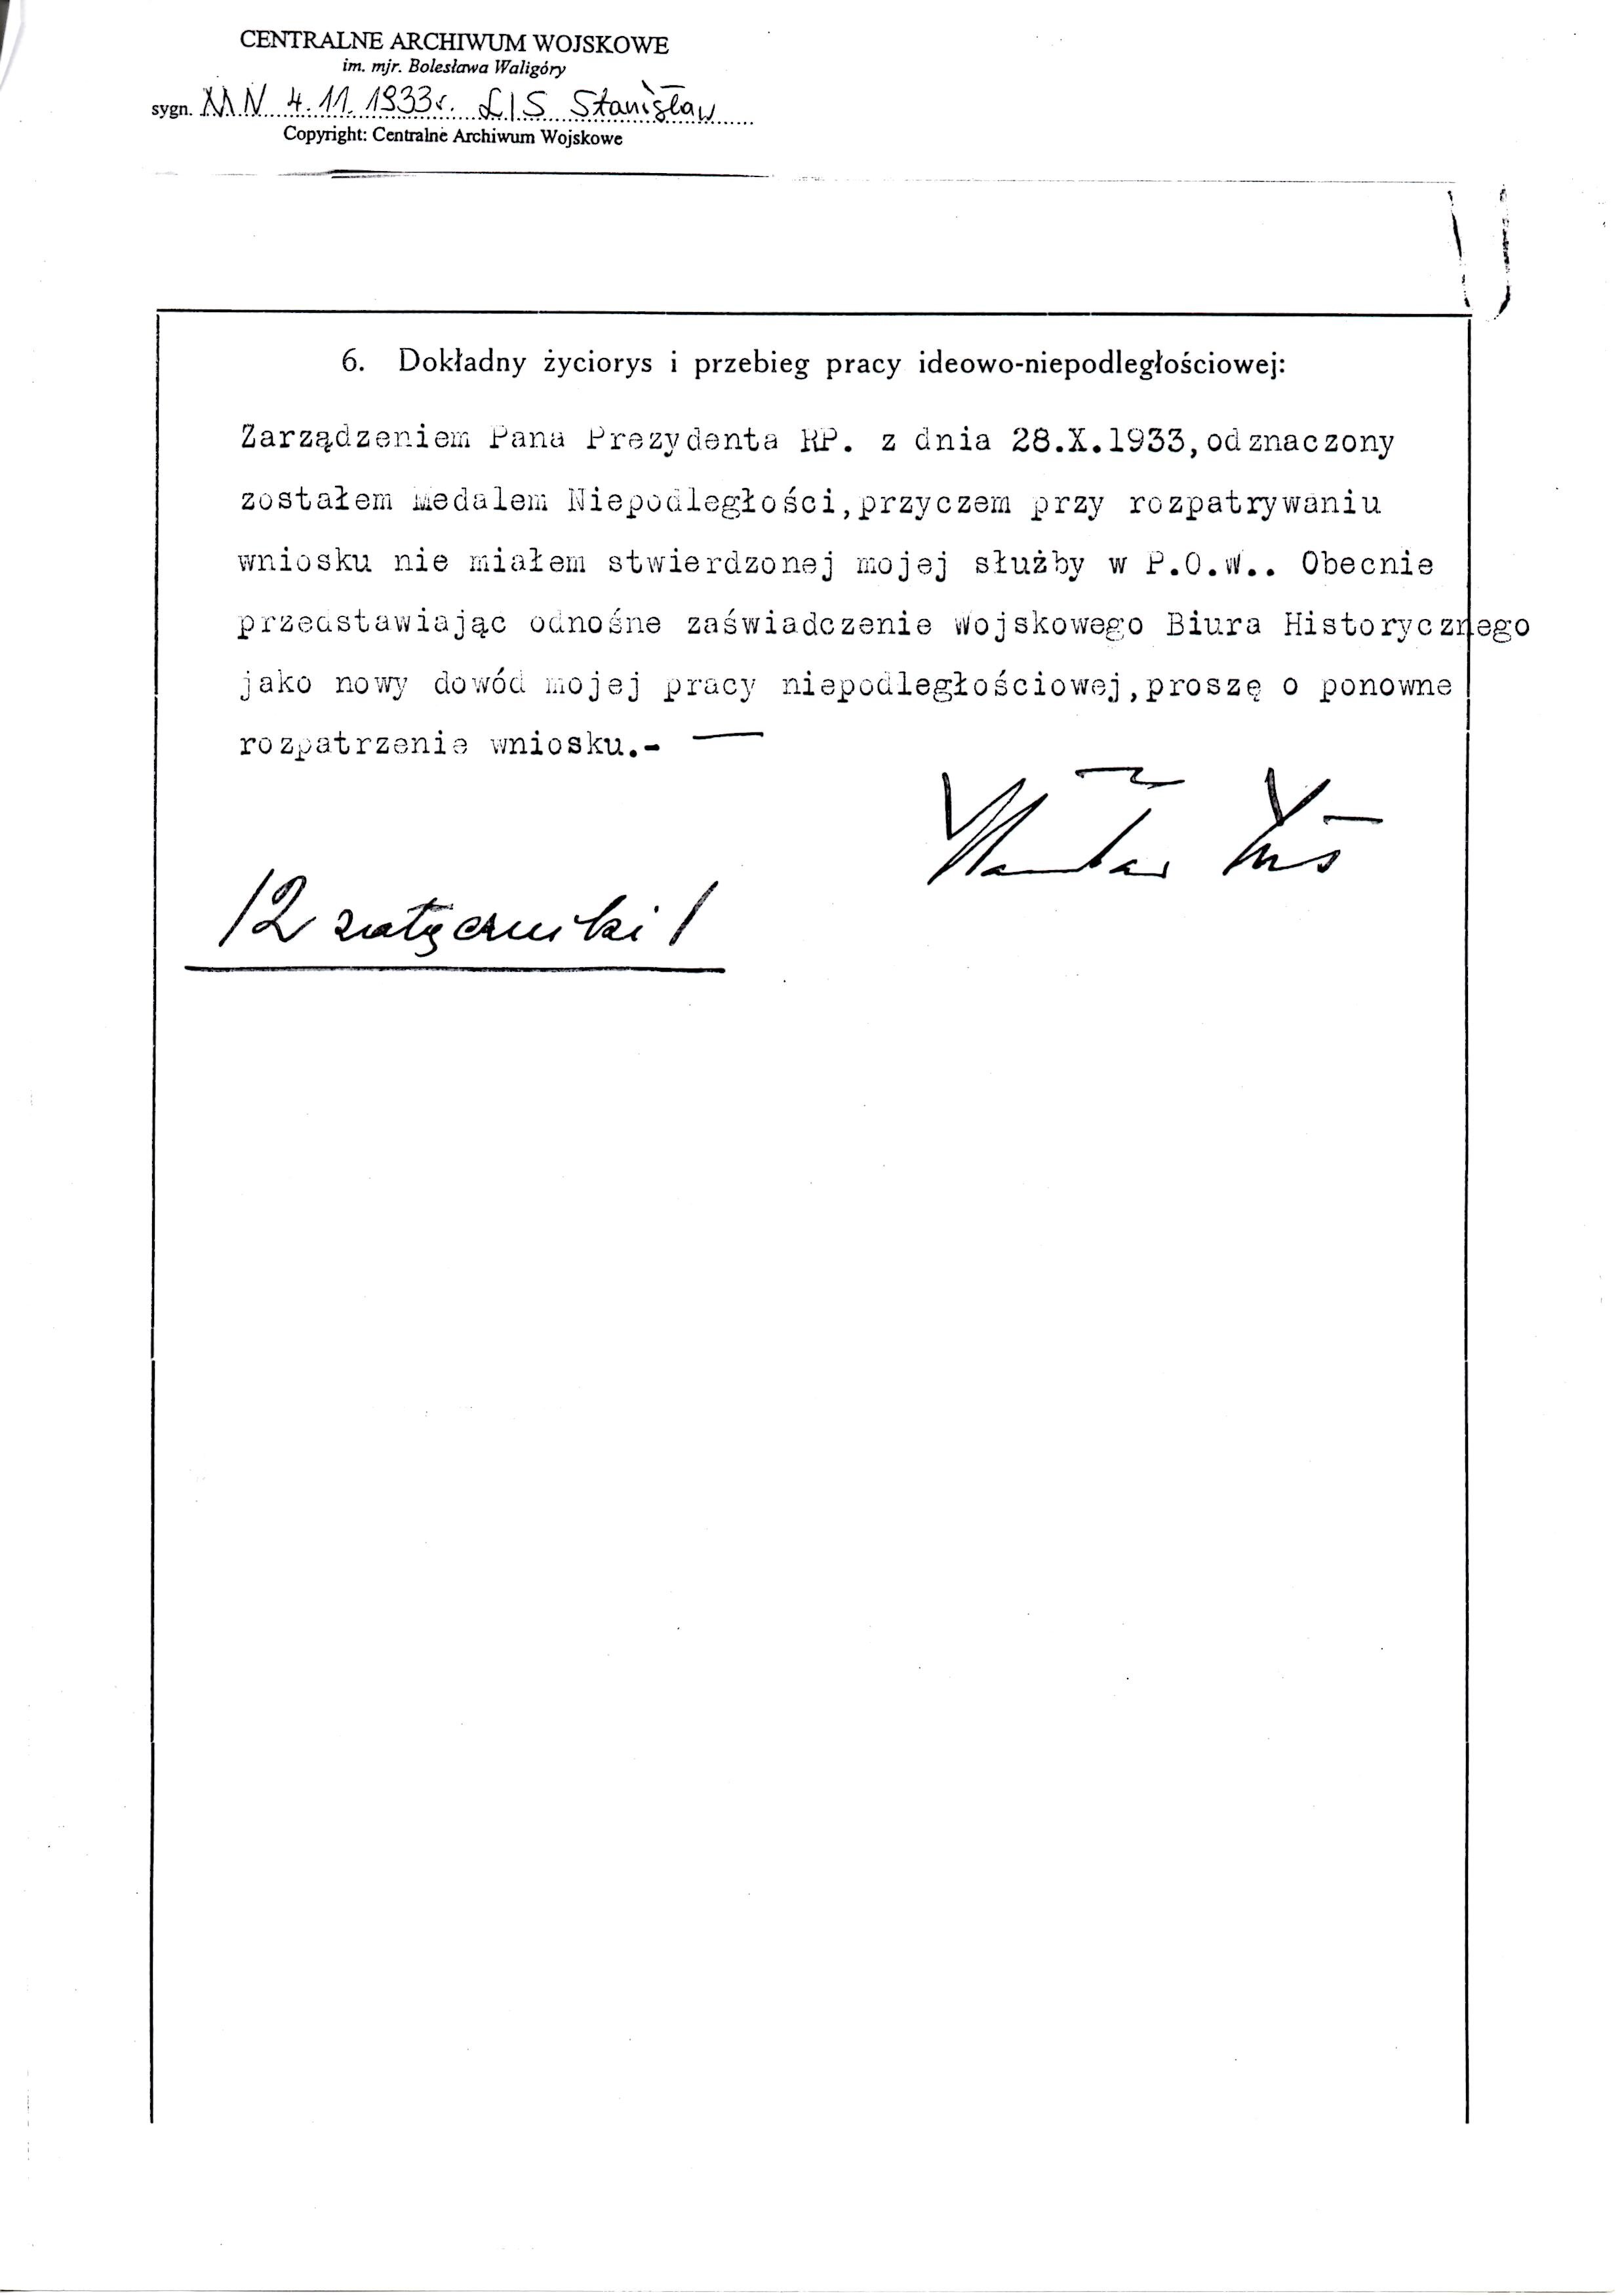 Stanislaw Lis Medal of Independance Document 1 page 2.jpg